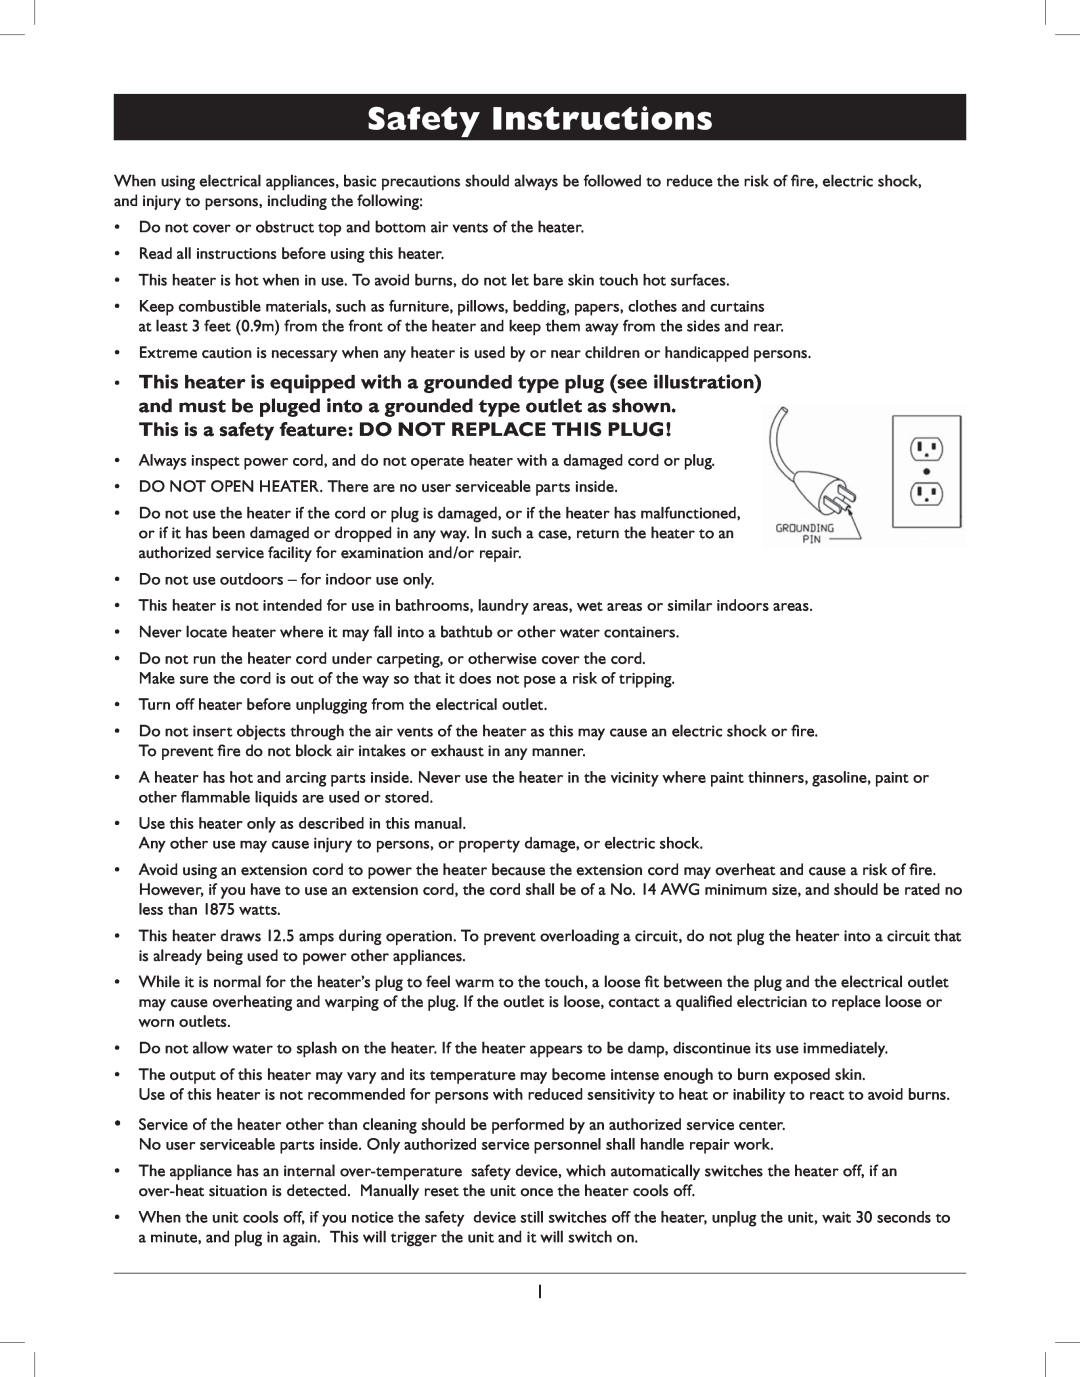 Amcor AMH8 owner manual Safety Instructions 